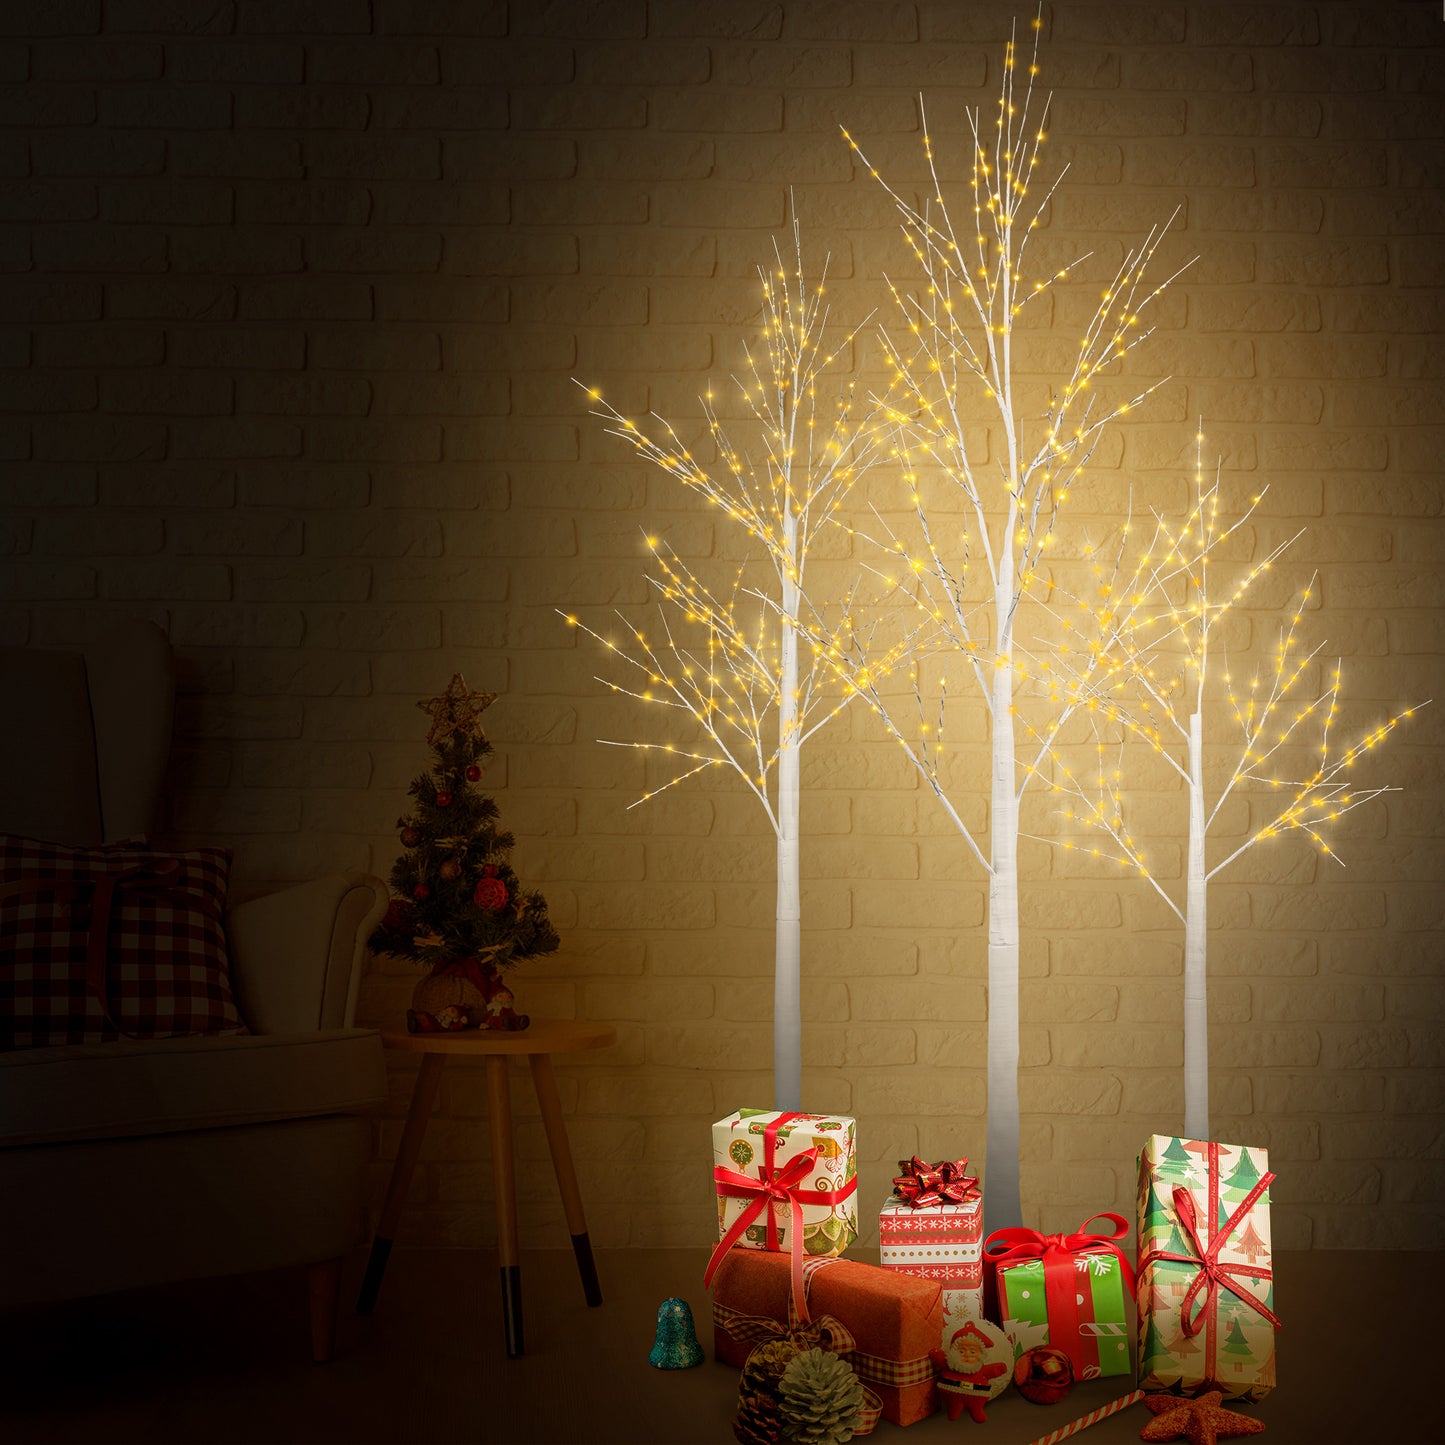 4ft, 5ft and 6ft Birch Tree, Set of 3, SYNGAR Birch Tree with Warm White LED Lights, for Christmas Decoration, Fits for Indoor Outdoor Garden Party Wedding, Lighted Christmas Tree for Home, Y033